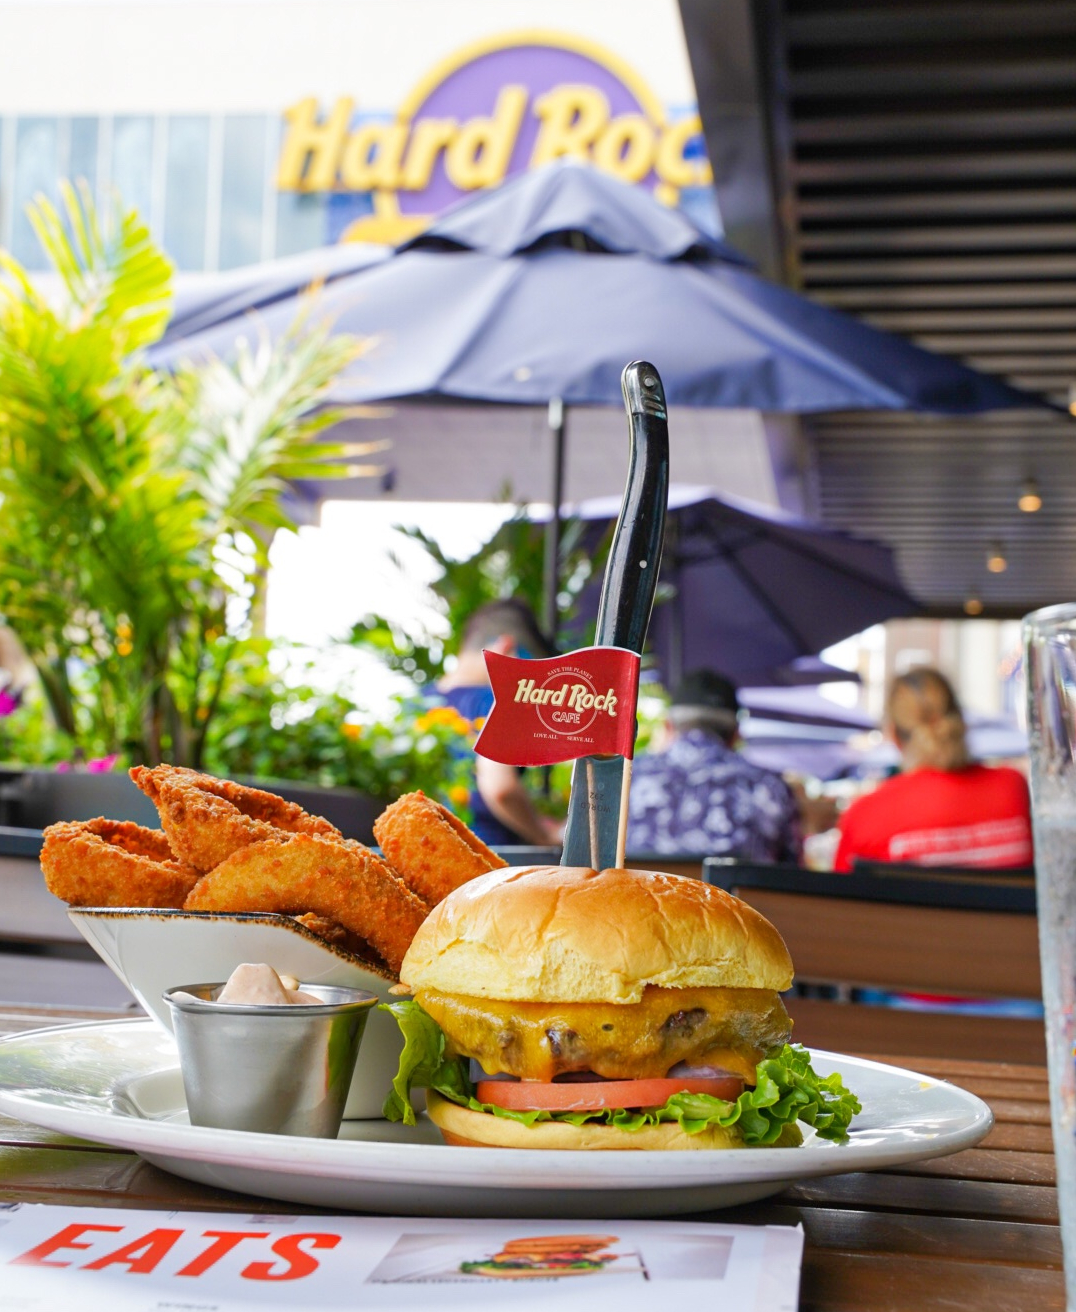 Places To Eat In Atlantic City - Hard Rock Cafe. - Claudia Caminero